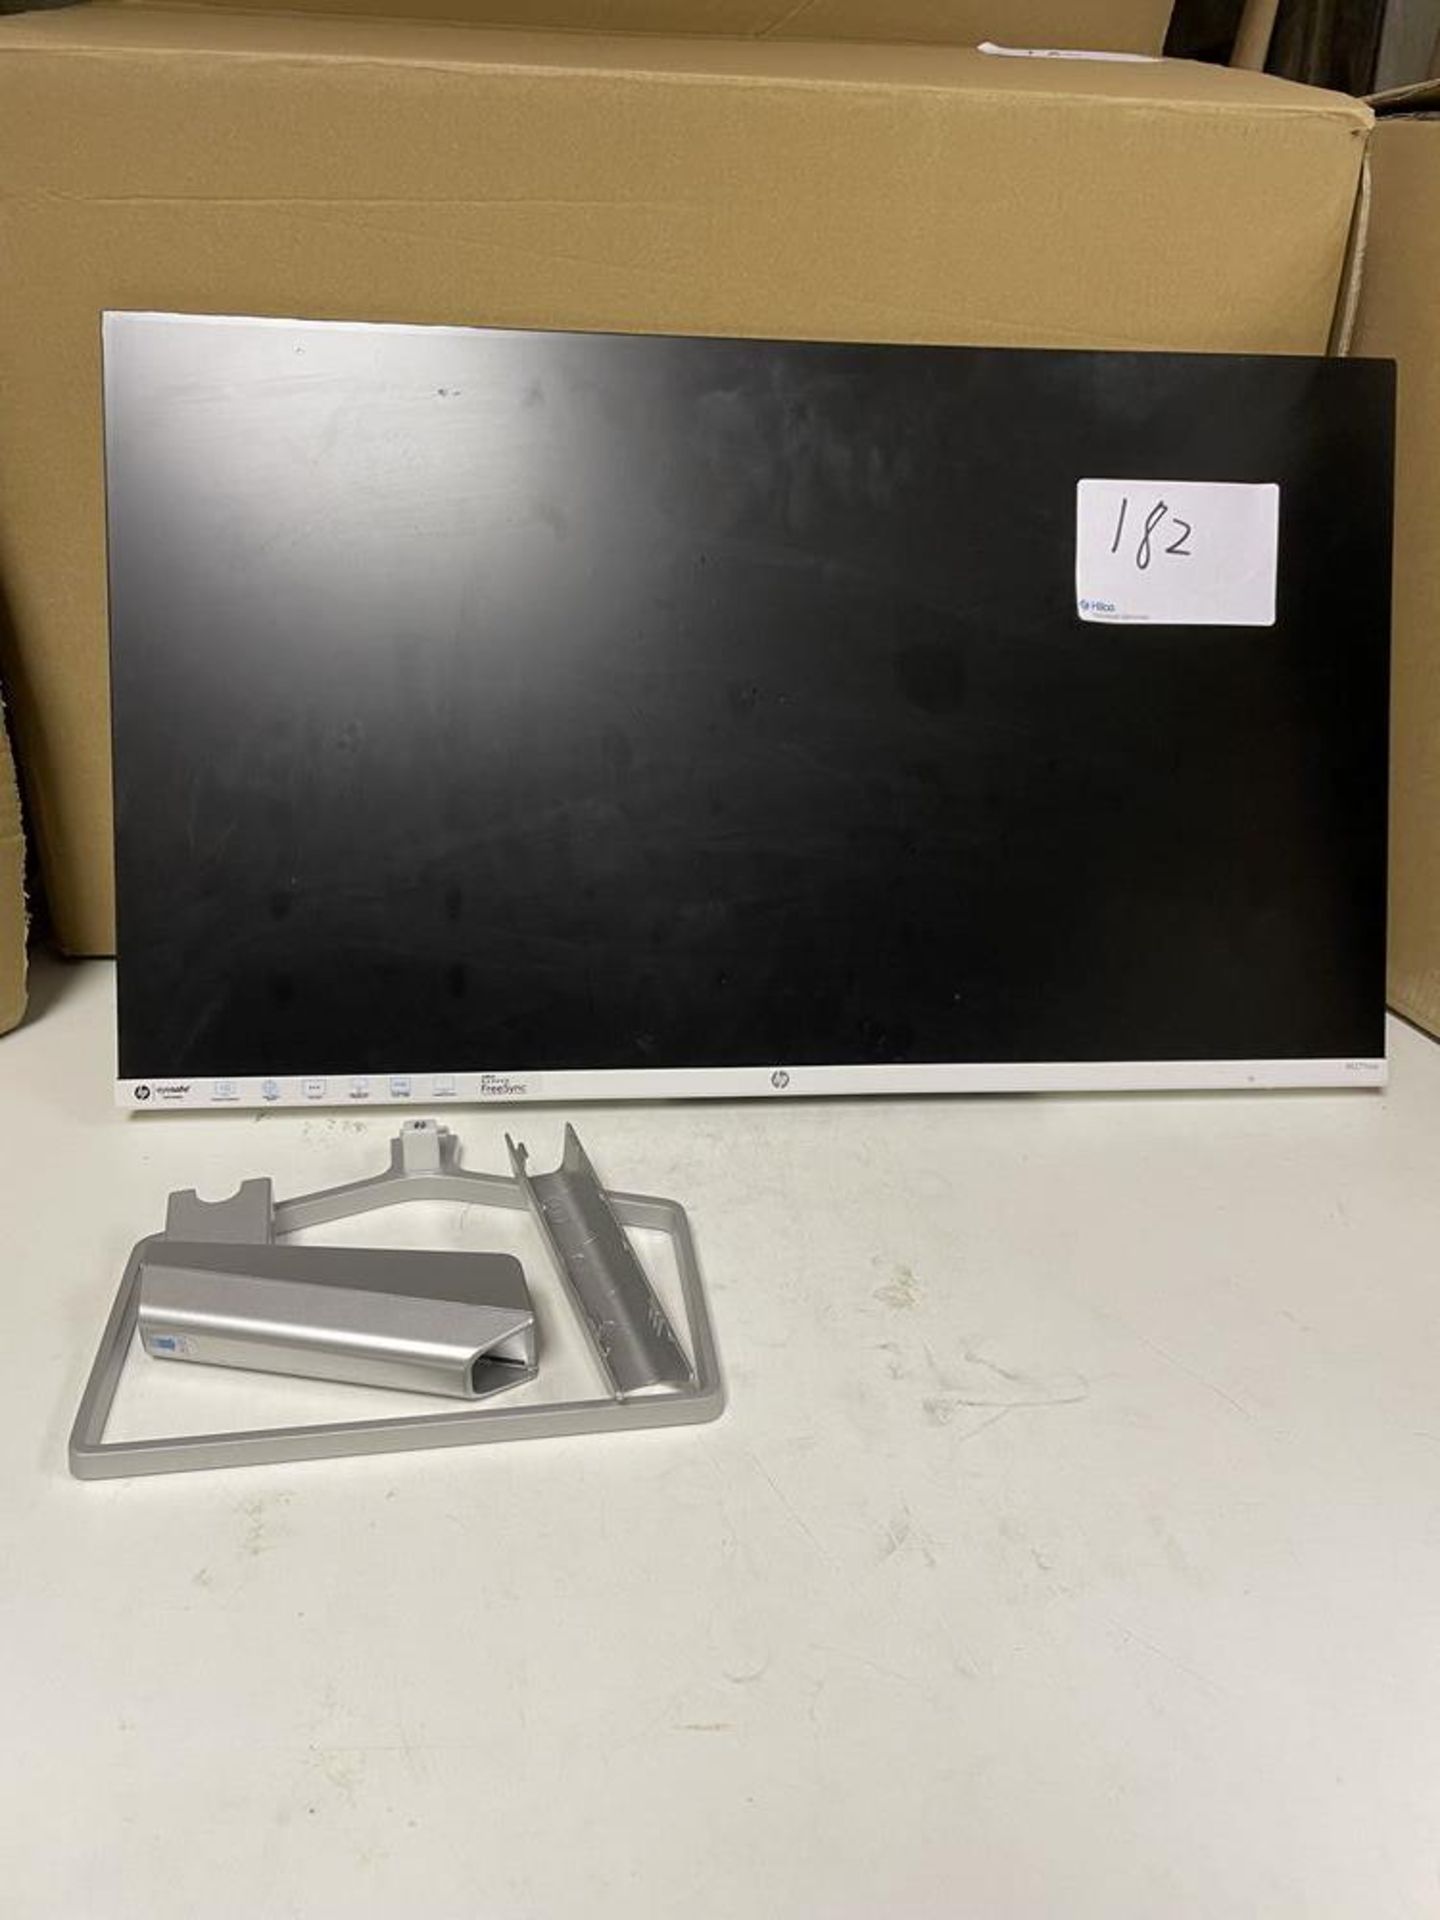 HP M27 FWA FHD FHD monitor With stand and plugs, comes with box. Serial No. 3CM1271ZYG